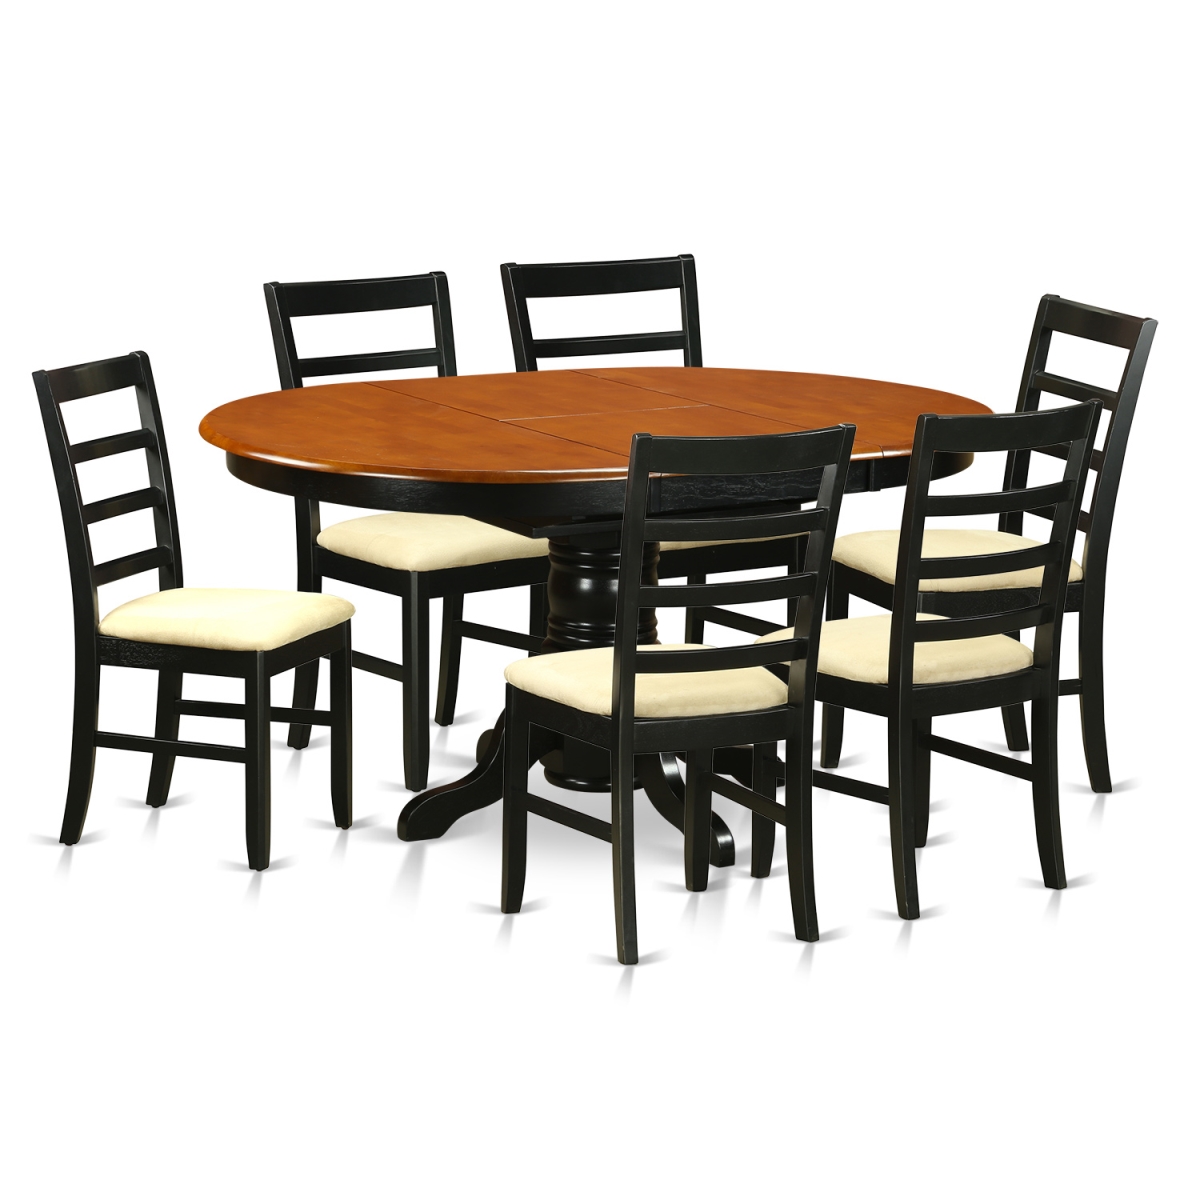 Picture of East West Furniture AVPF7-BCH-C Microfiber Dining Set with 6 Wooden Chairs, Black & Cherry - 7 Piece